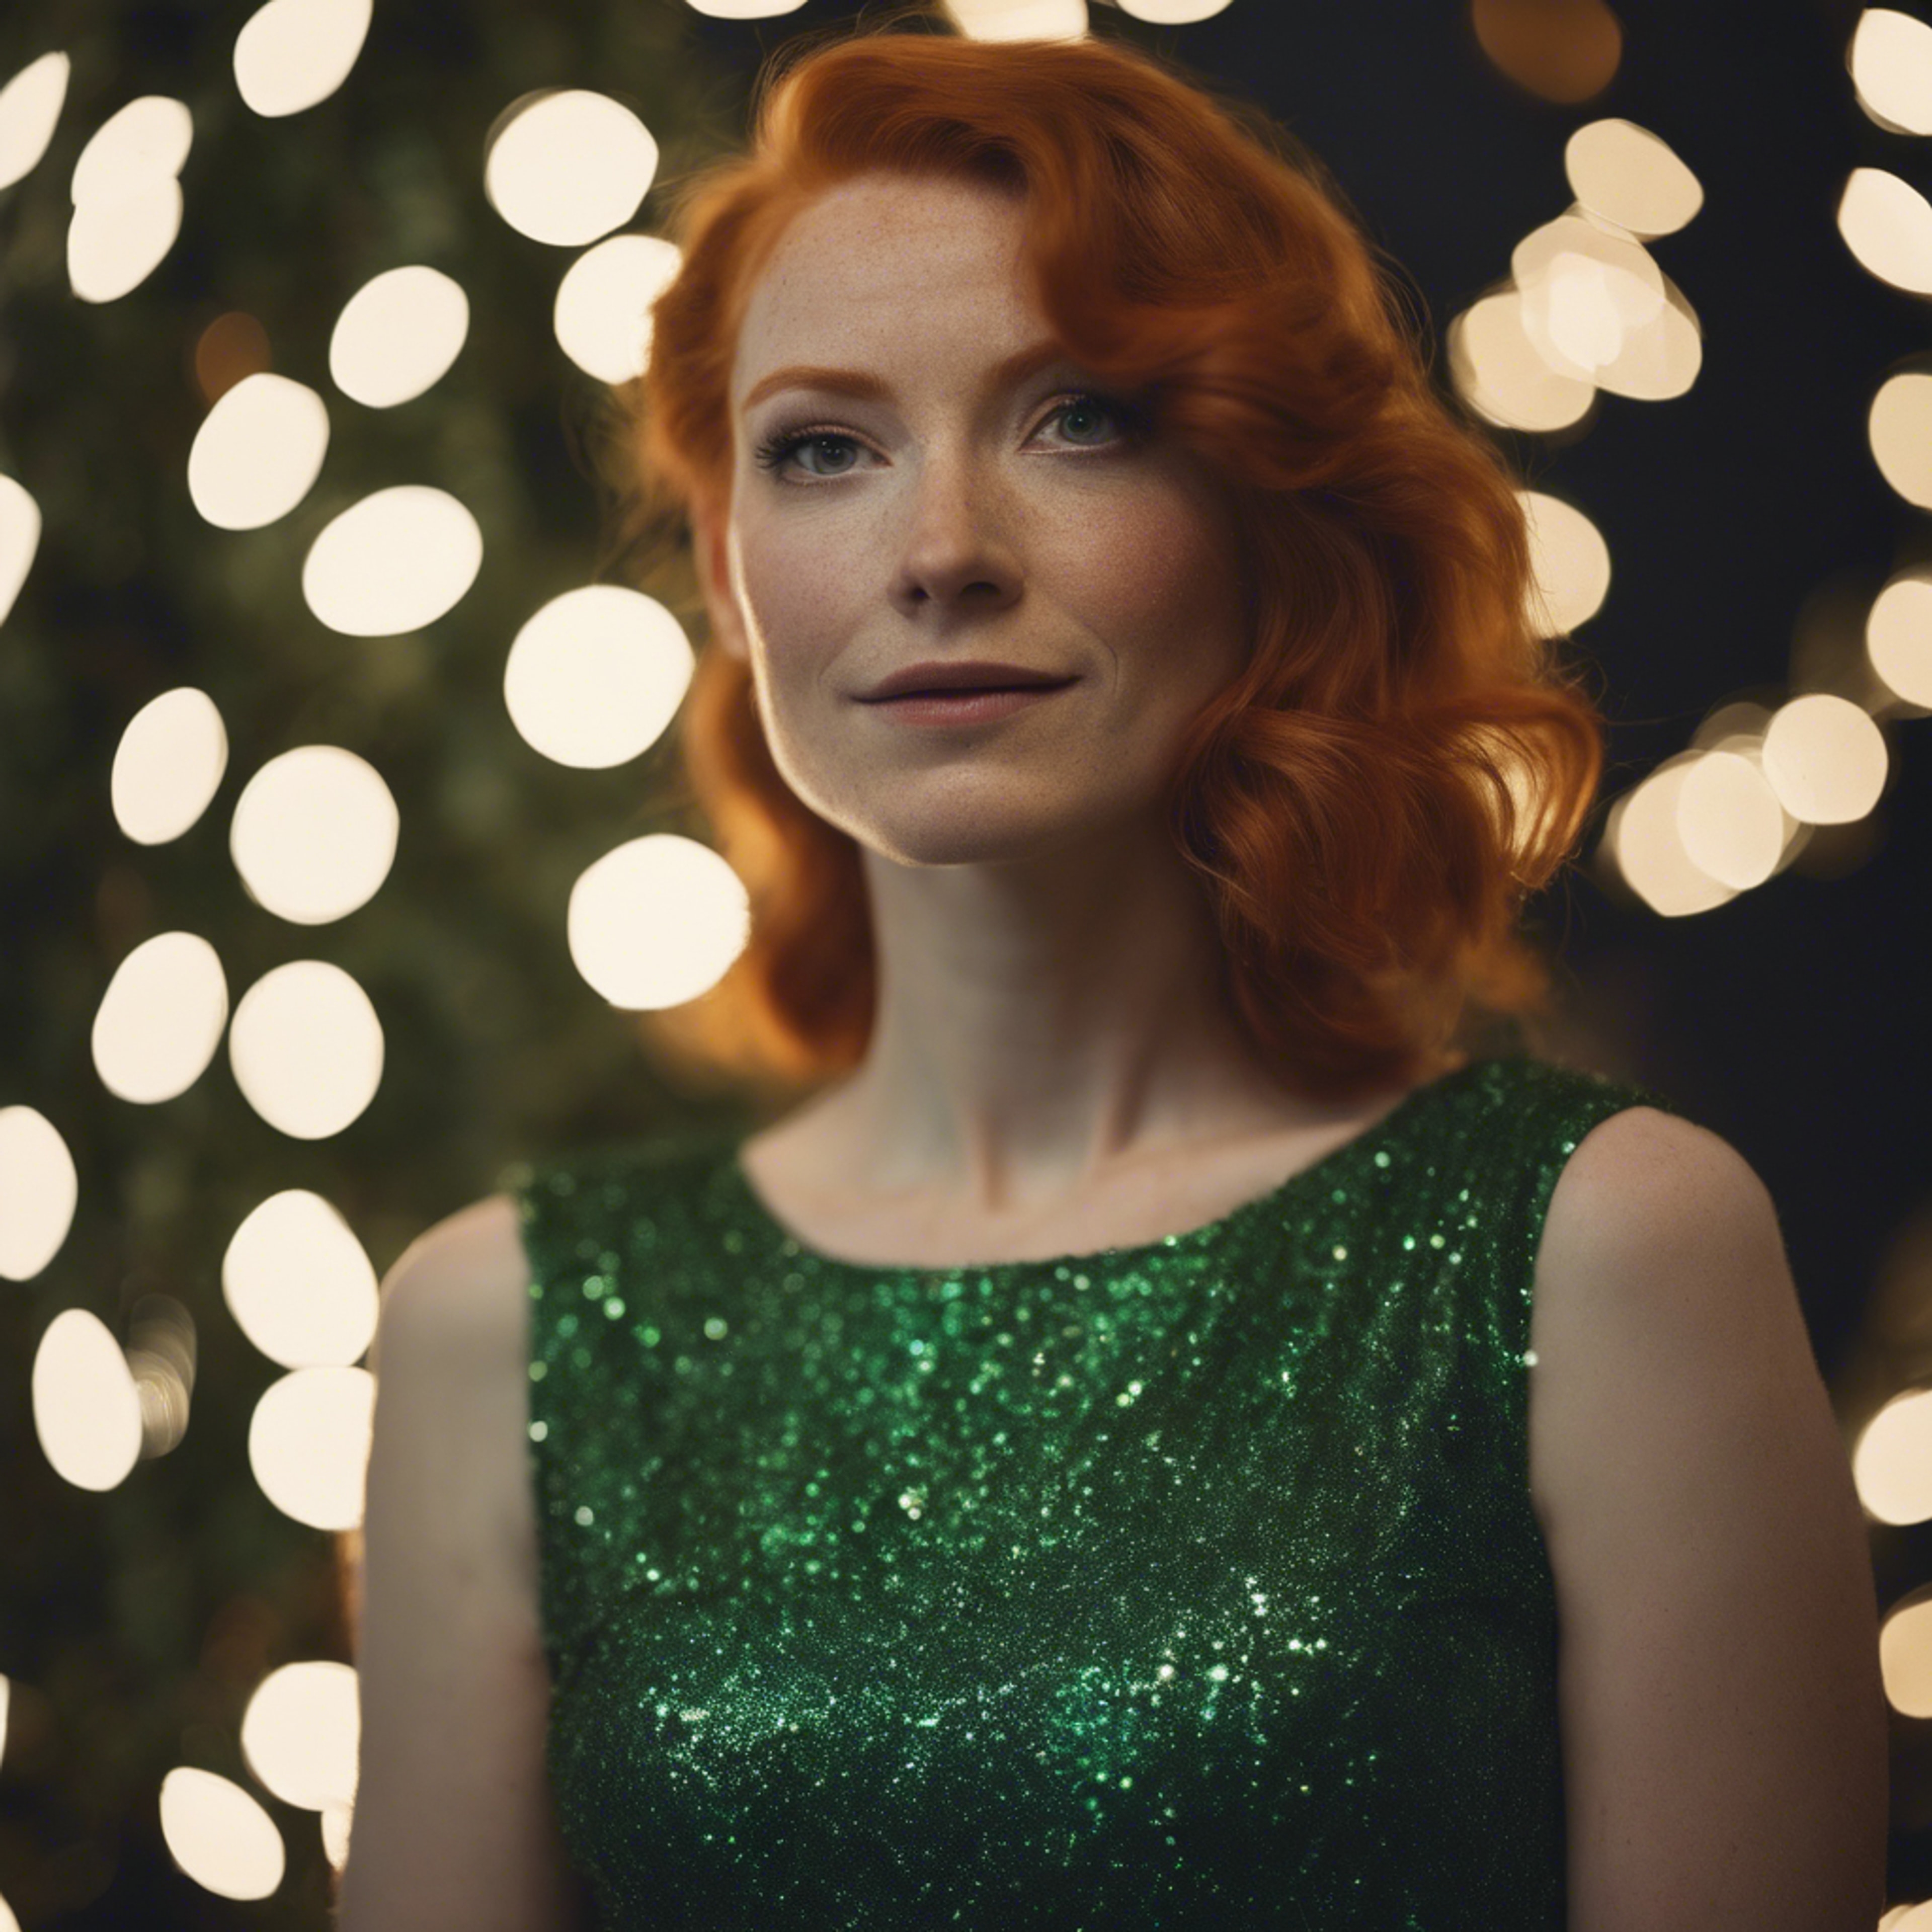 A redheaded woman wearing a sparkly green dress at a Christmas party Hintergrund[a7aea6b7222f4d2facc9]